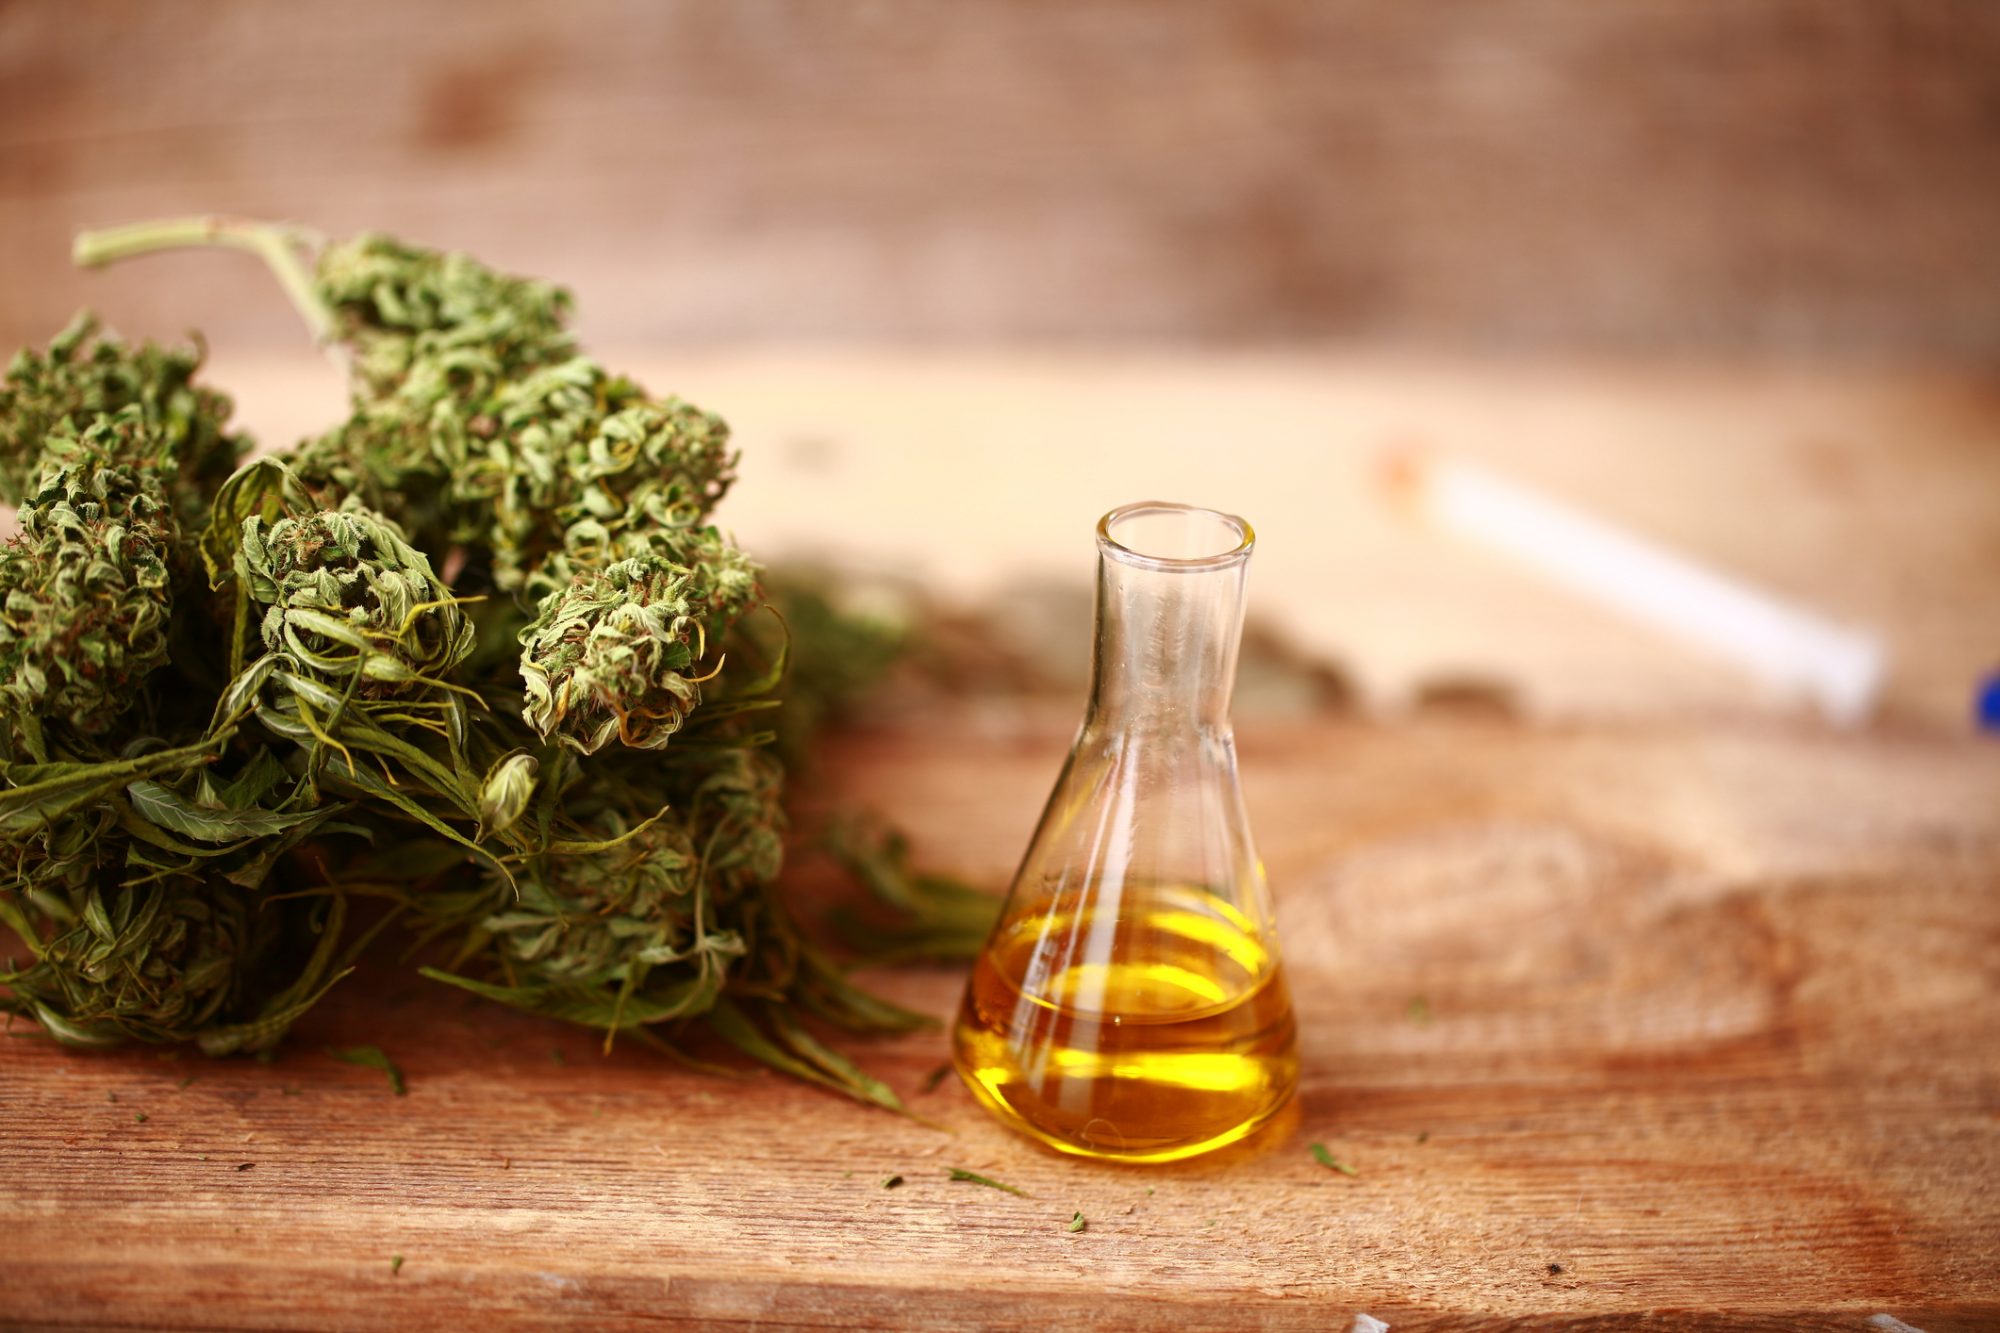 Are there any medical benefits to using THC lube?